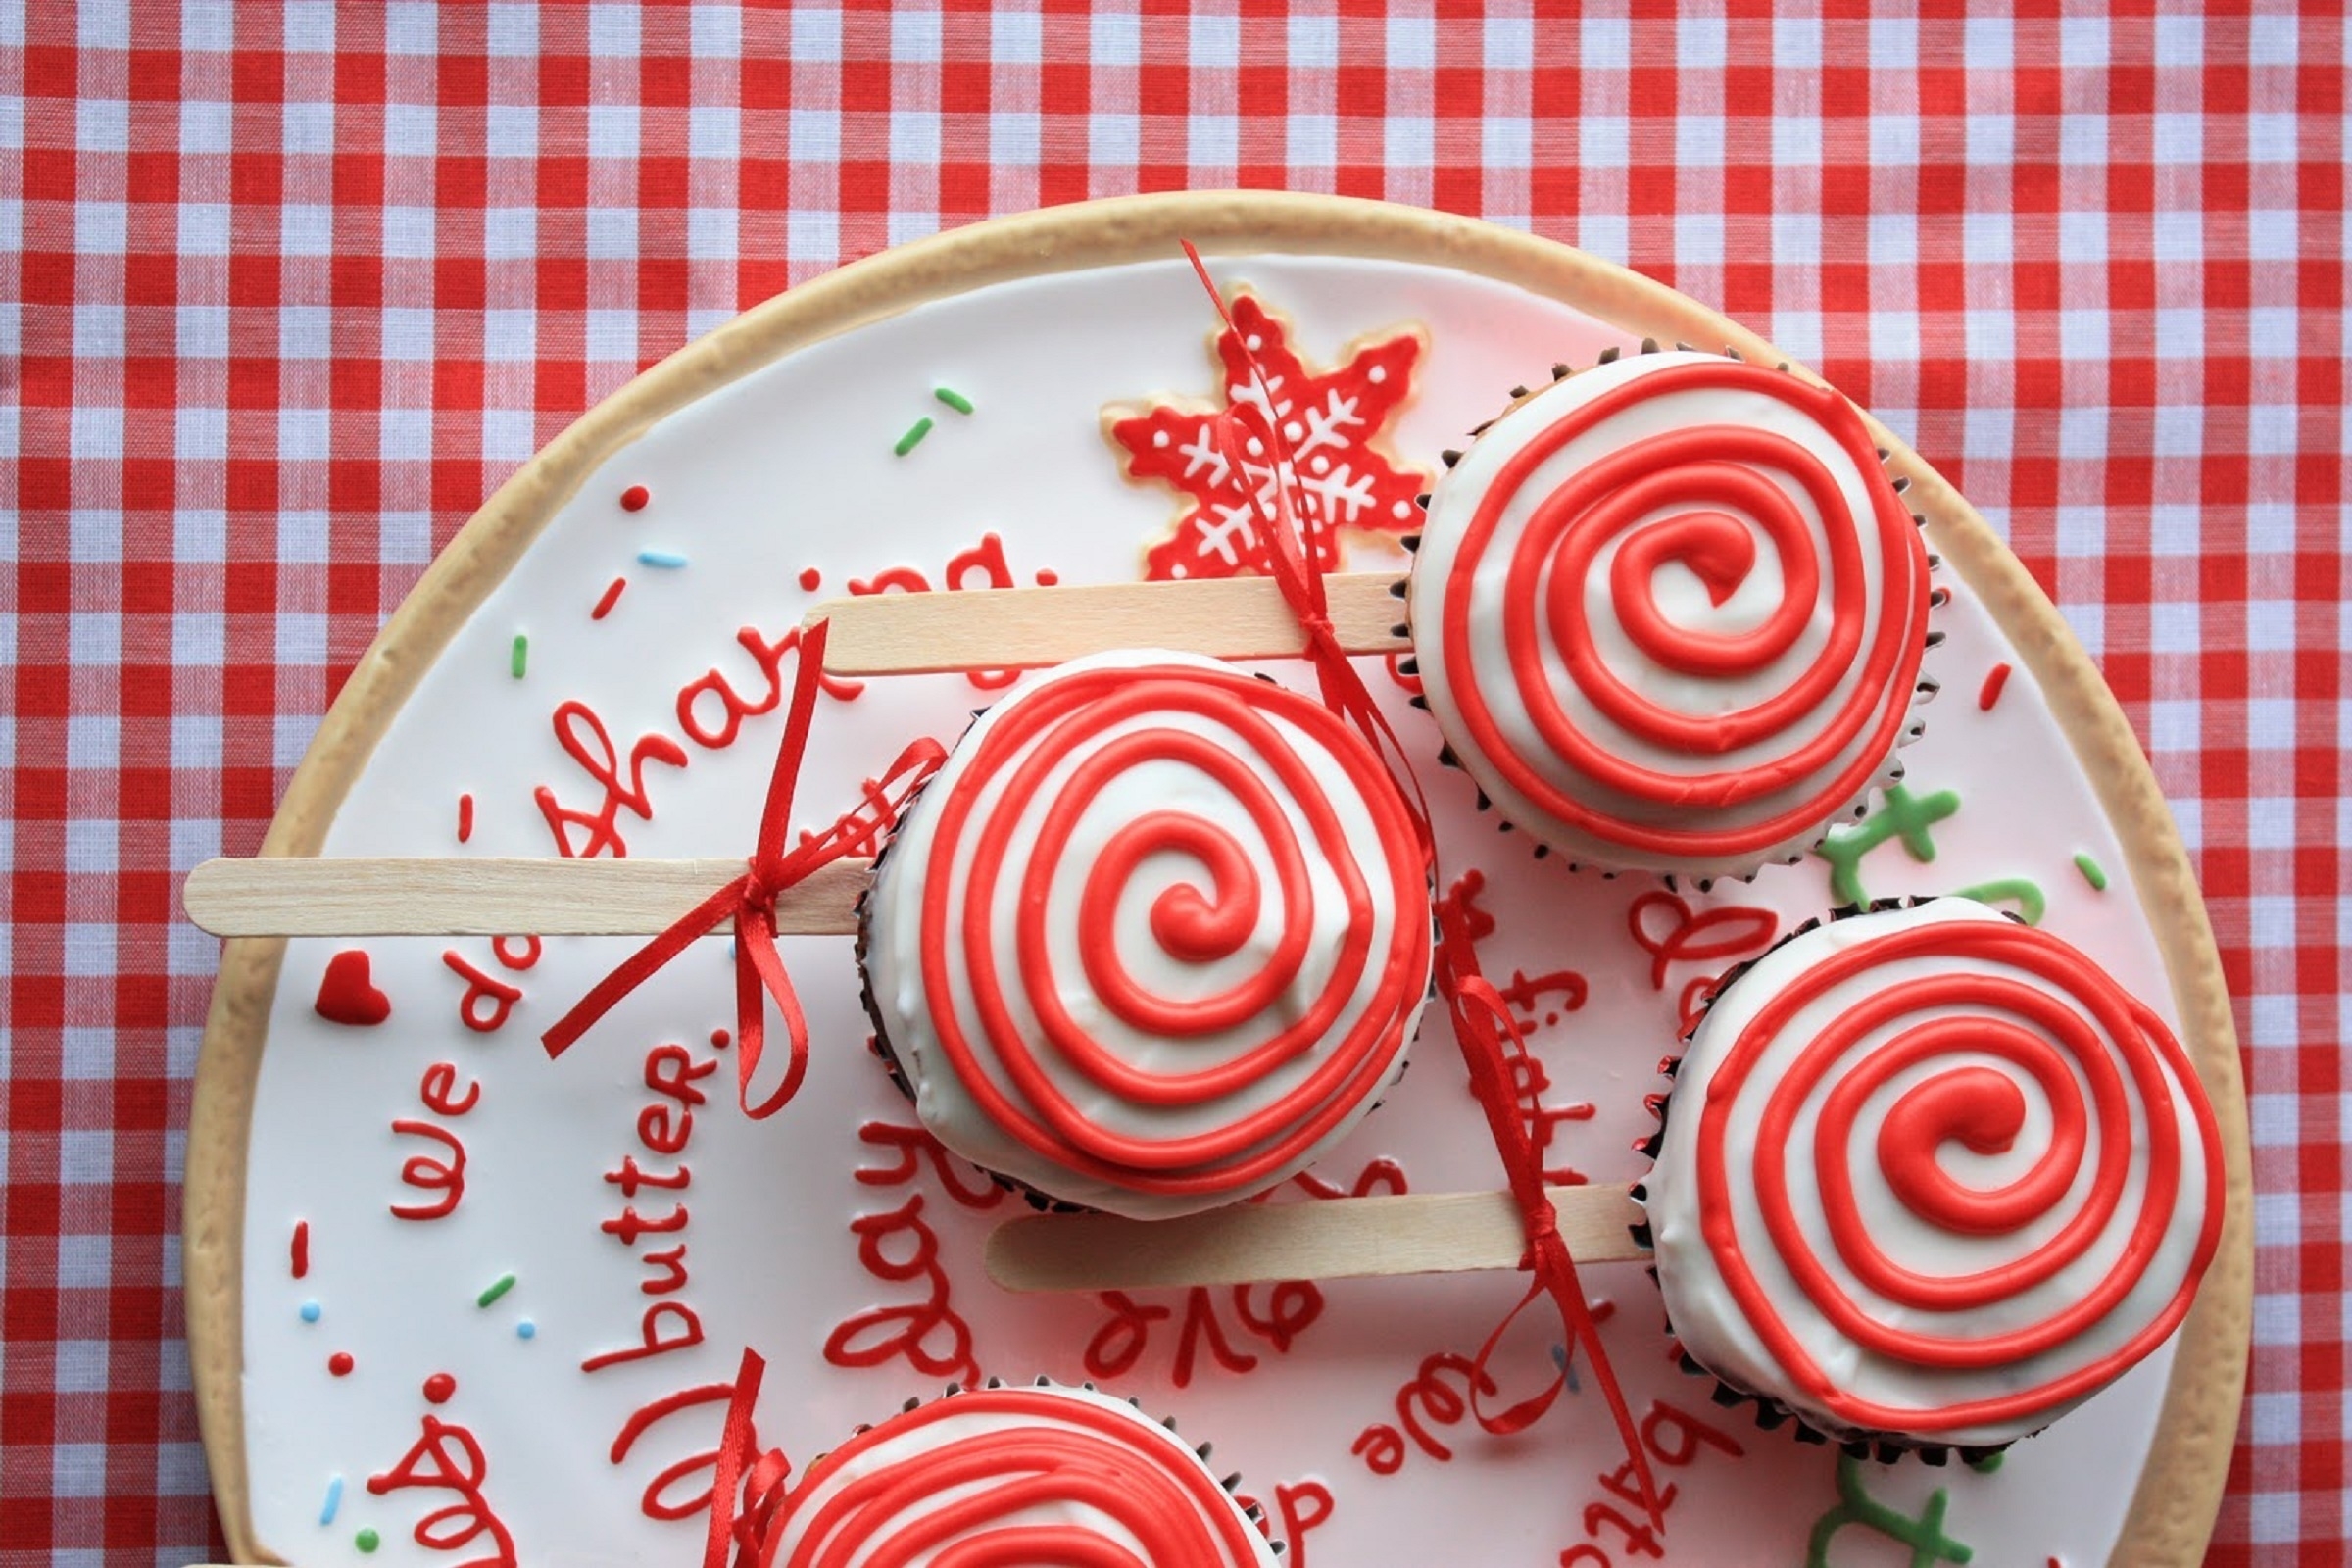 candy, food, pattern, holiday, cake, surprise, lollipop